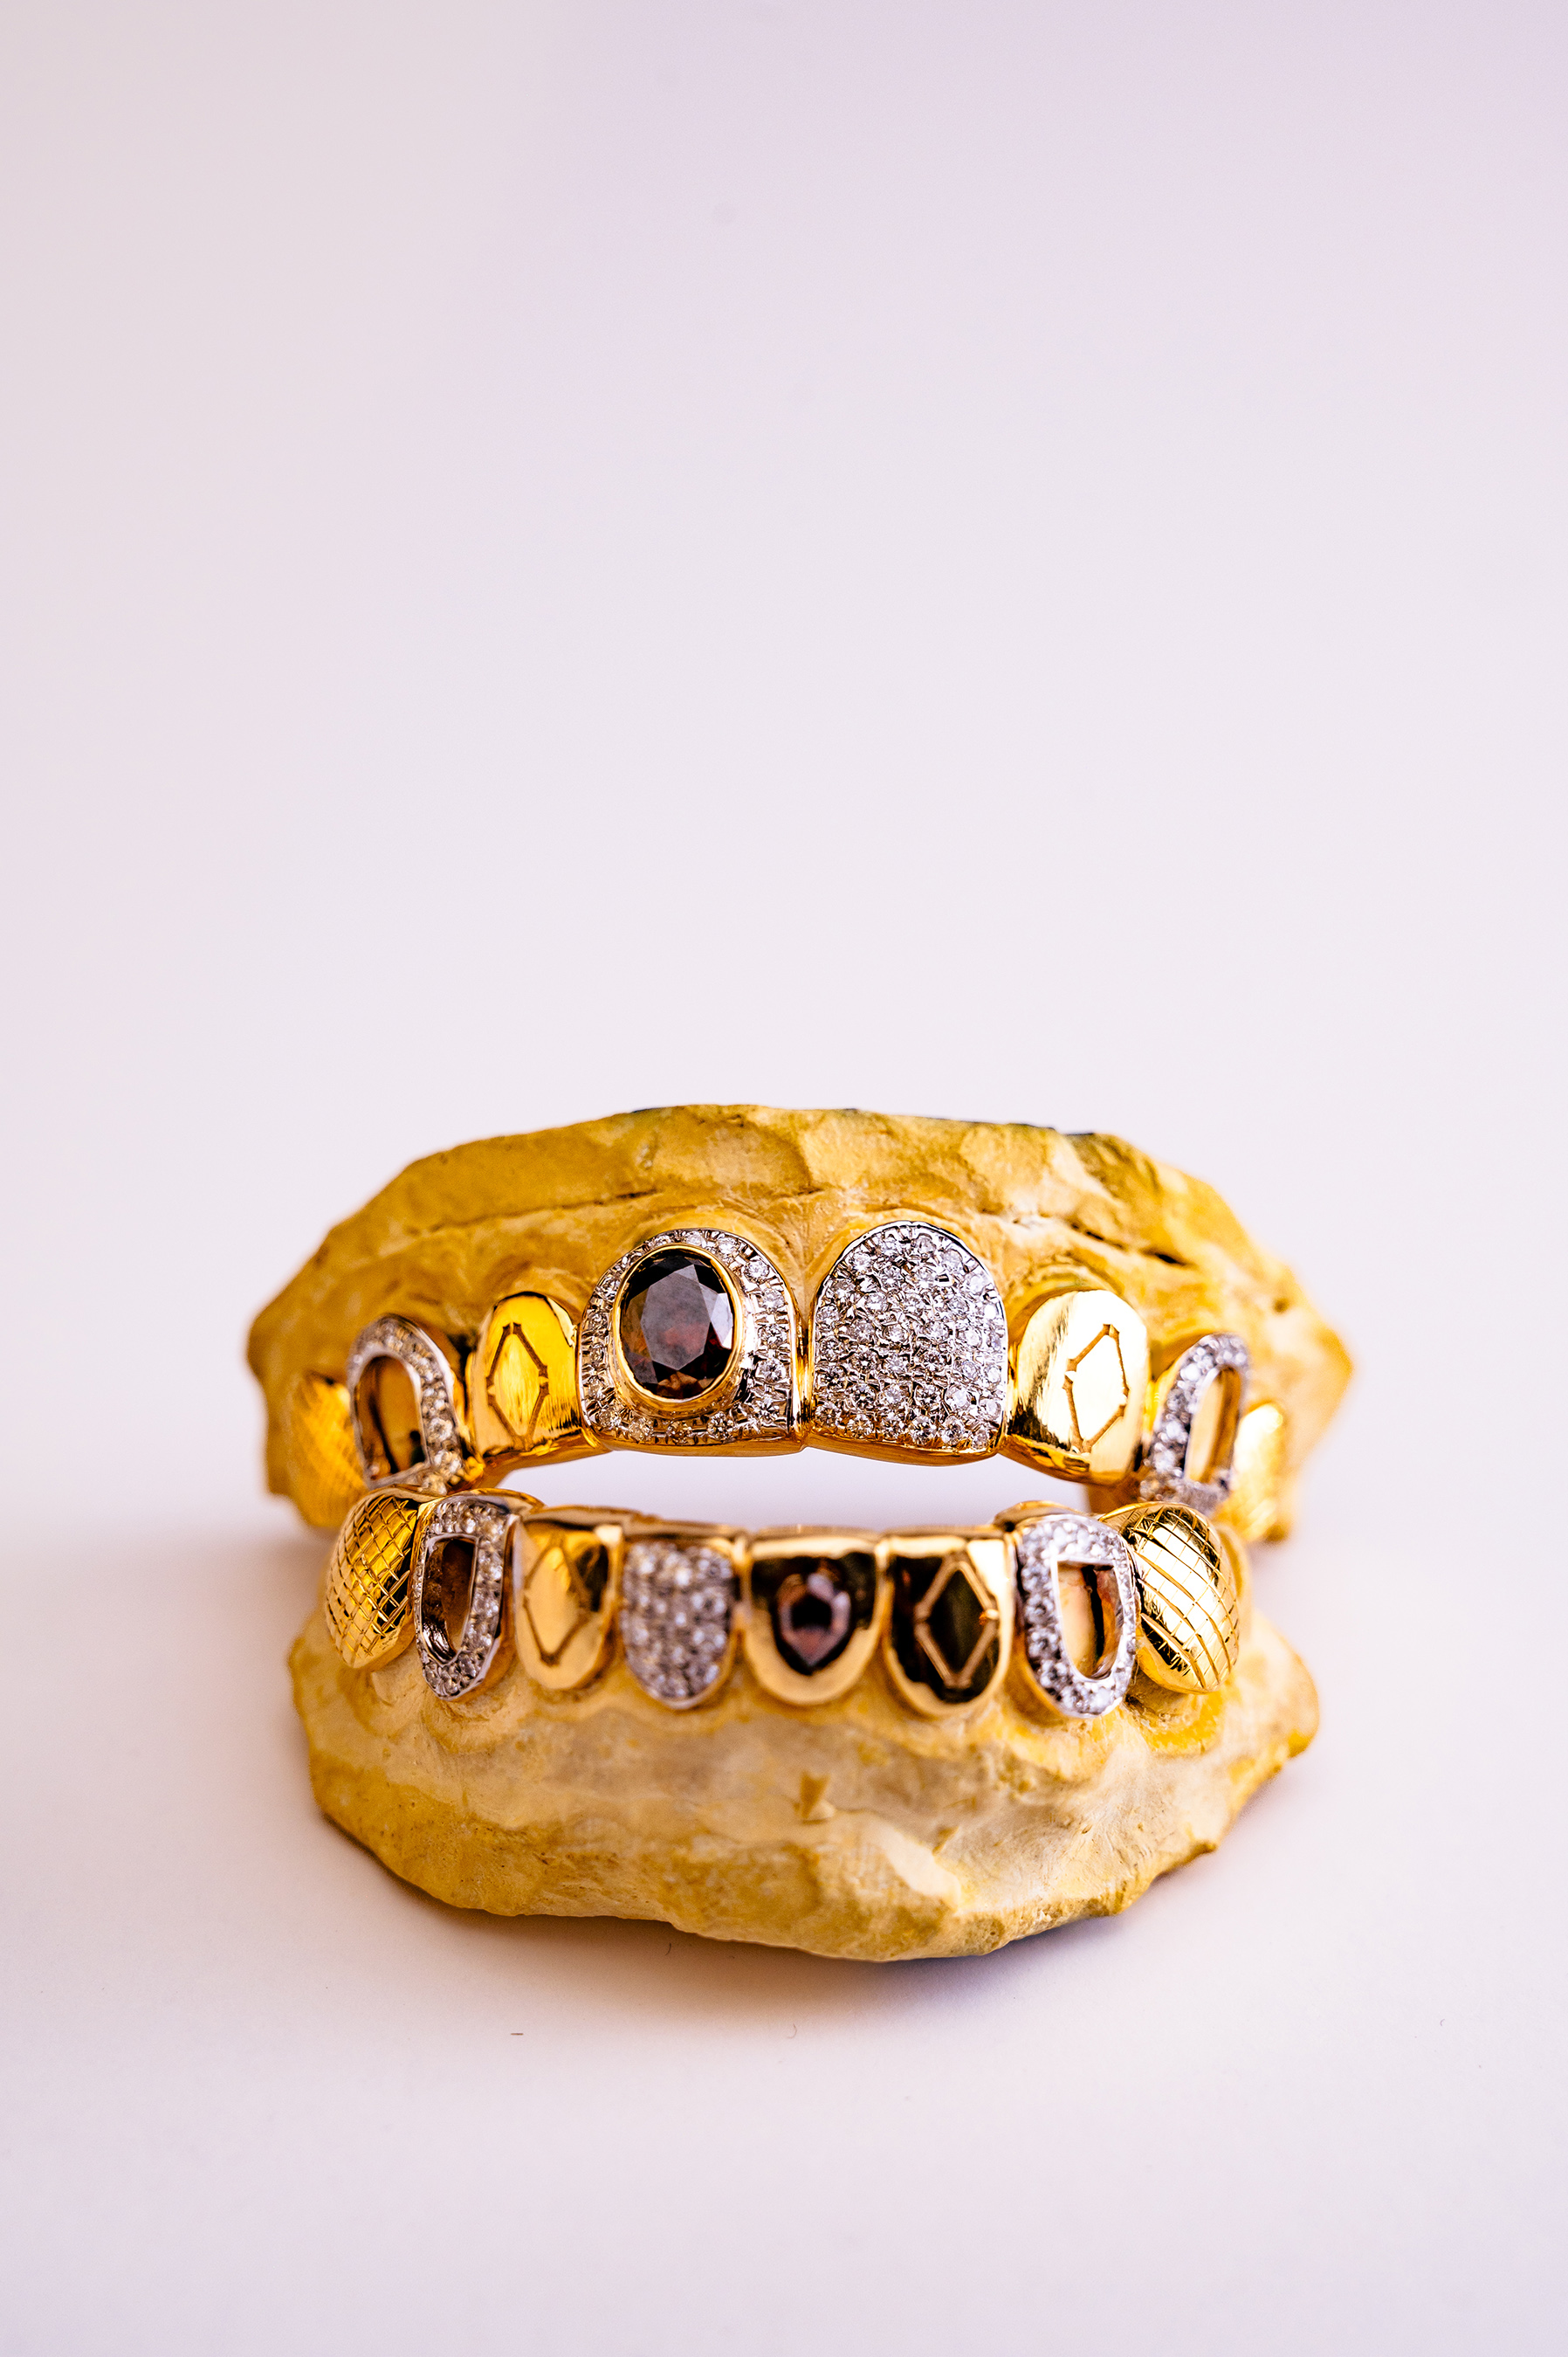 Celebrity Grillz Maker Scotty ATL created a premium custom grillz set that will be auctioned off on December 15 via PopShop Live at 6 PM ET. Proceeds benefit the Atlanta Artist Relief Fund, whose mission is to help every Atlanta artist thrive.